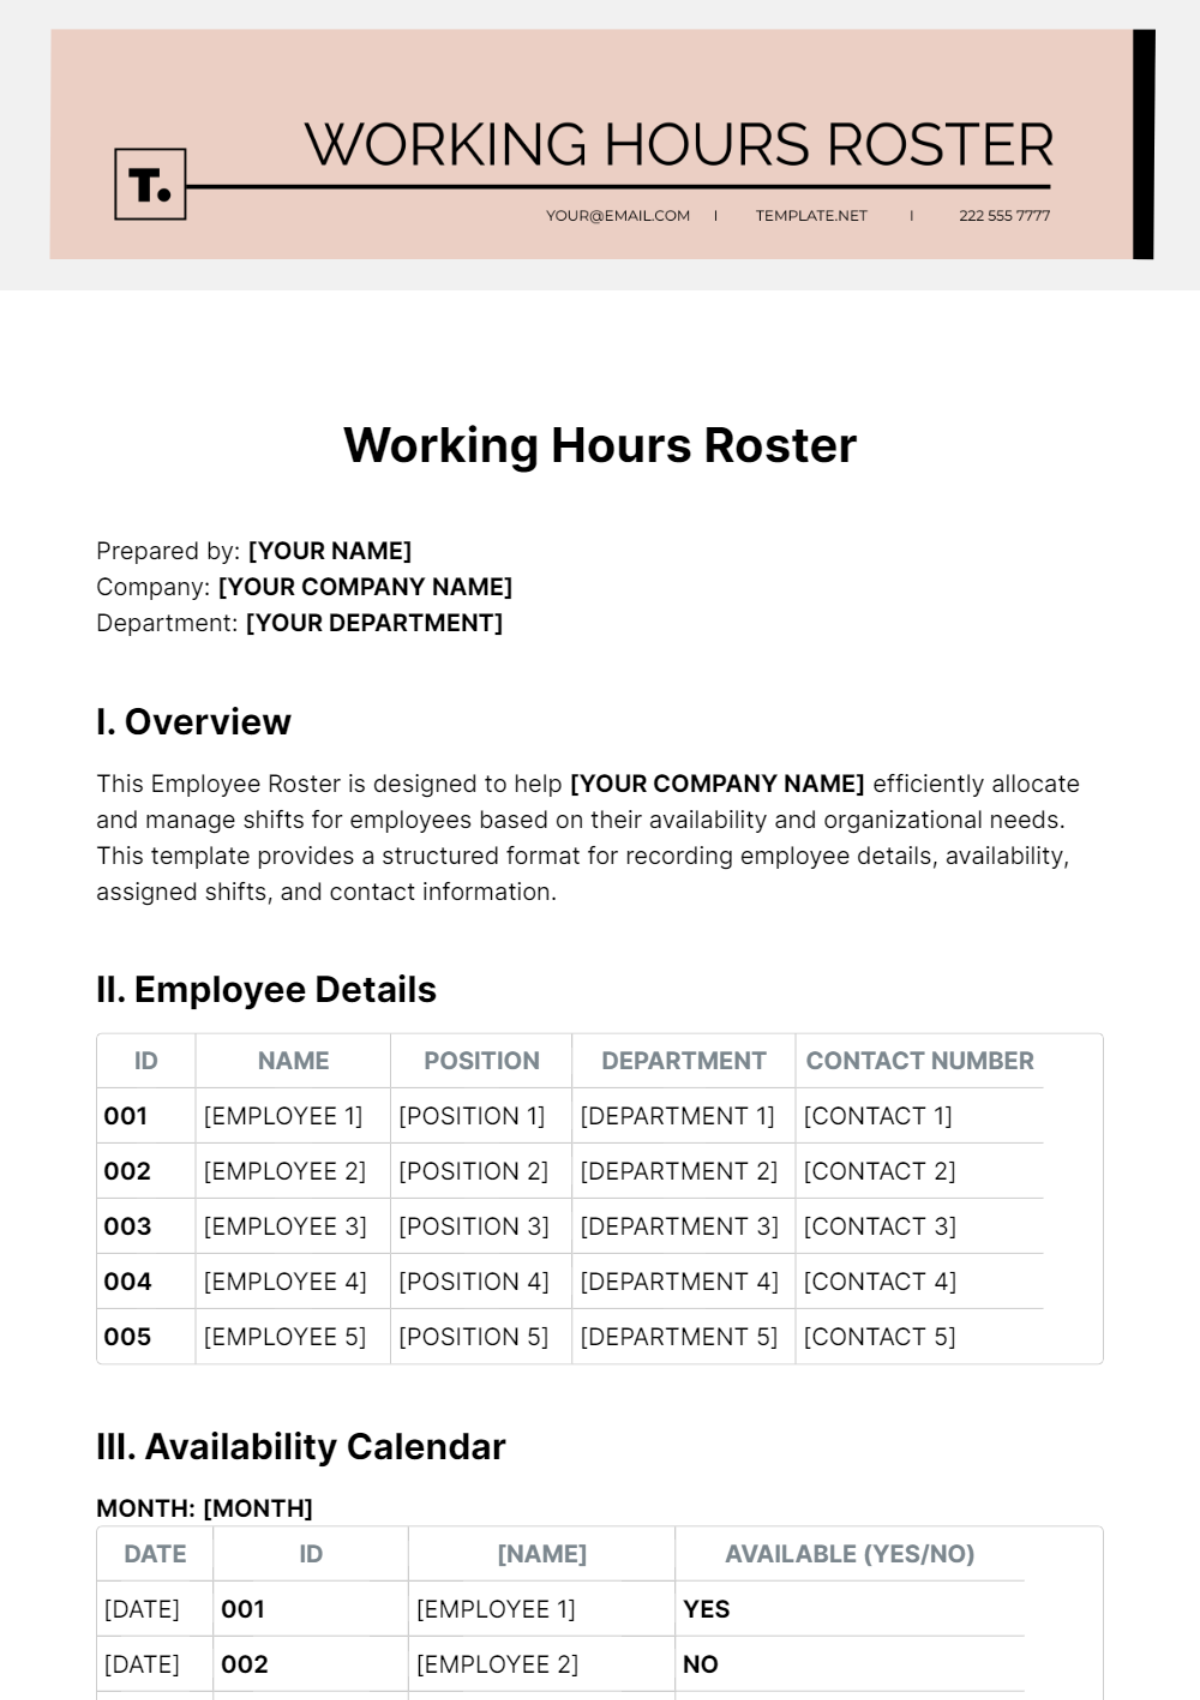 Working Hours Roster Template